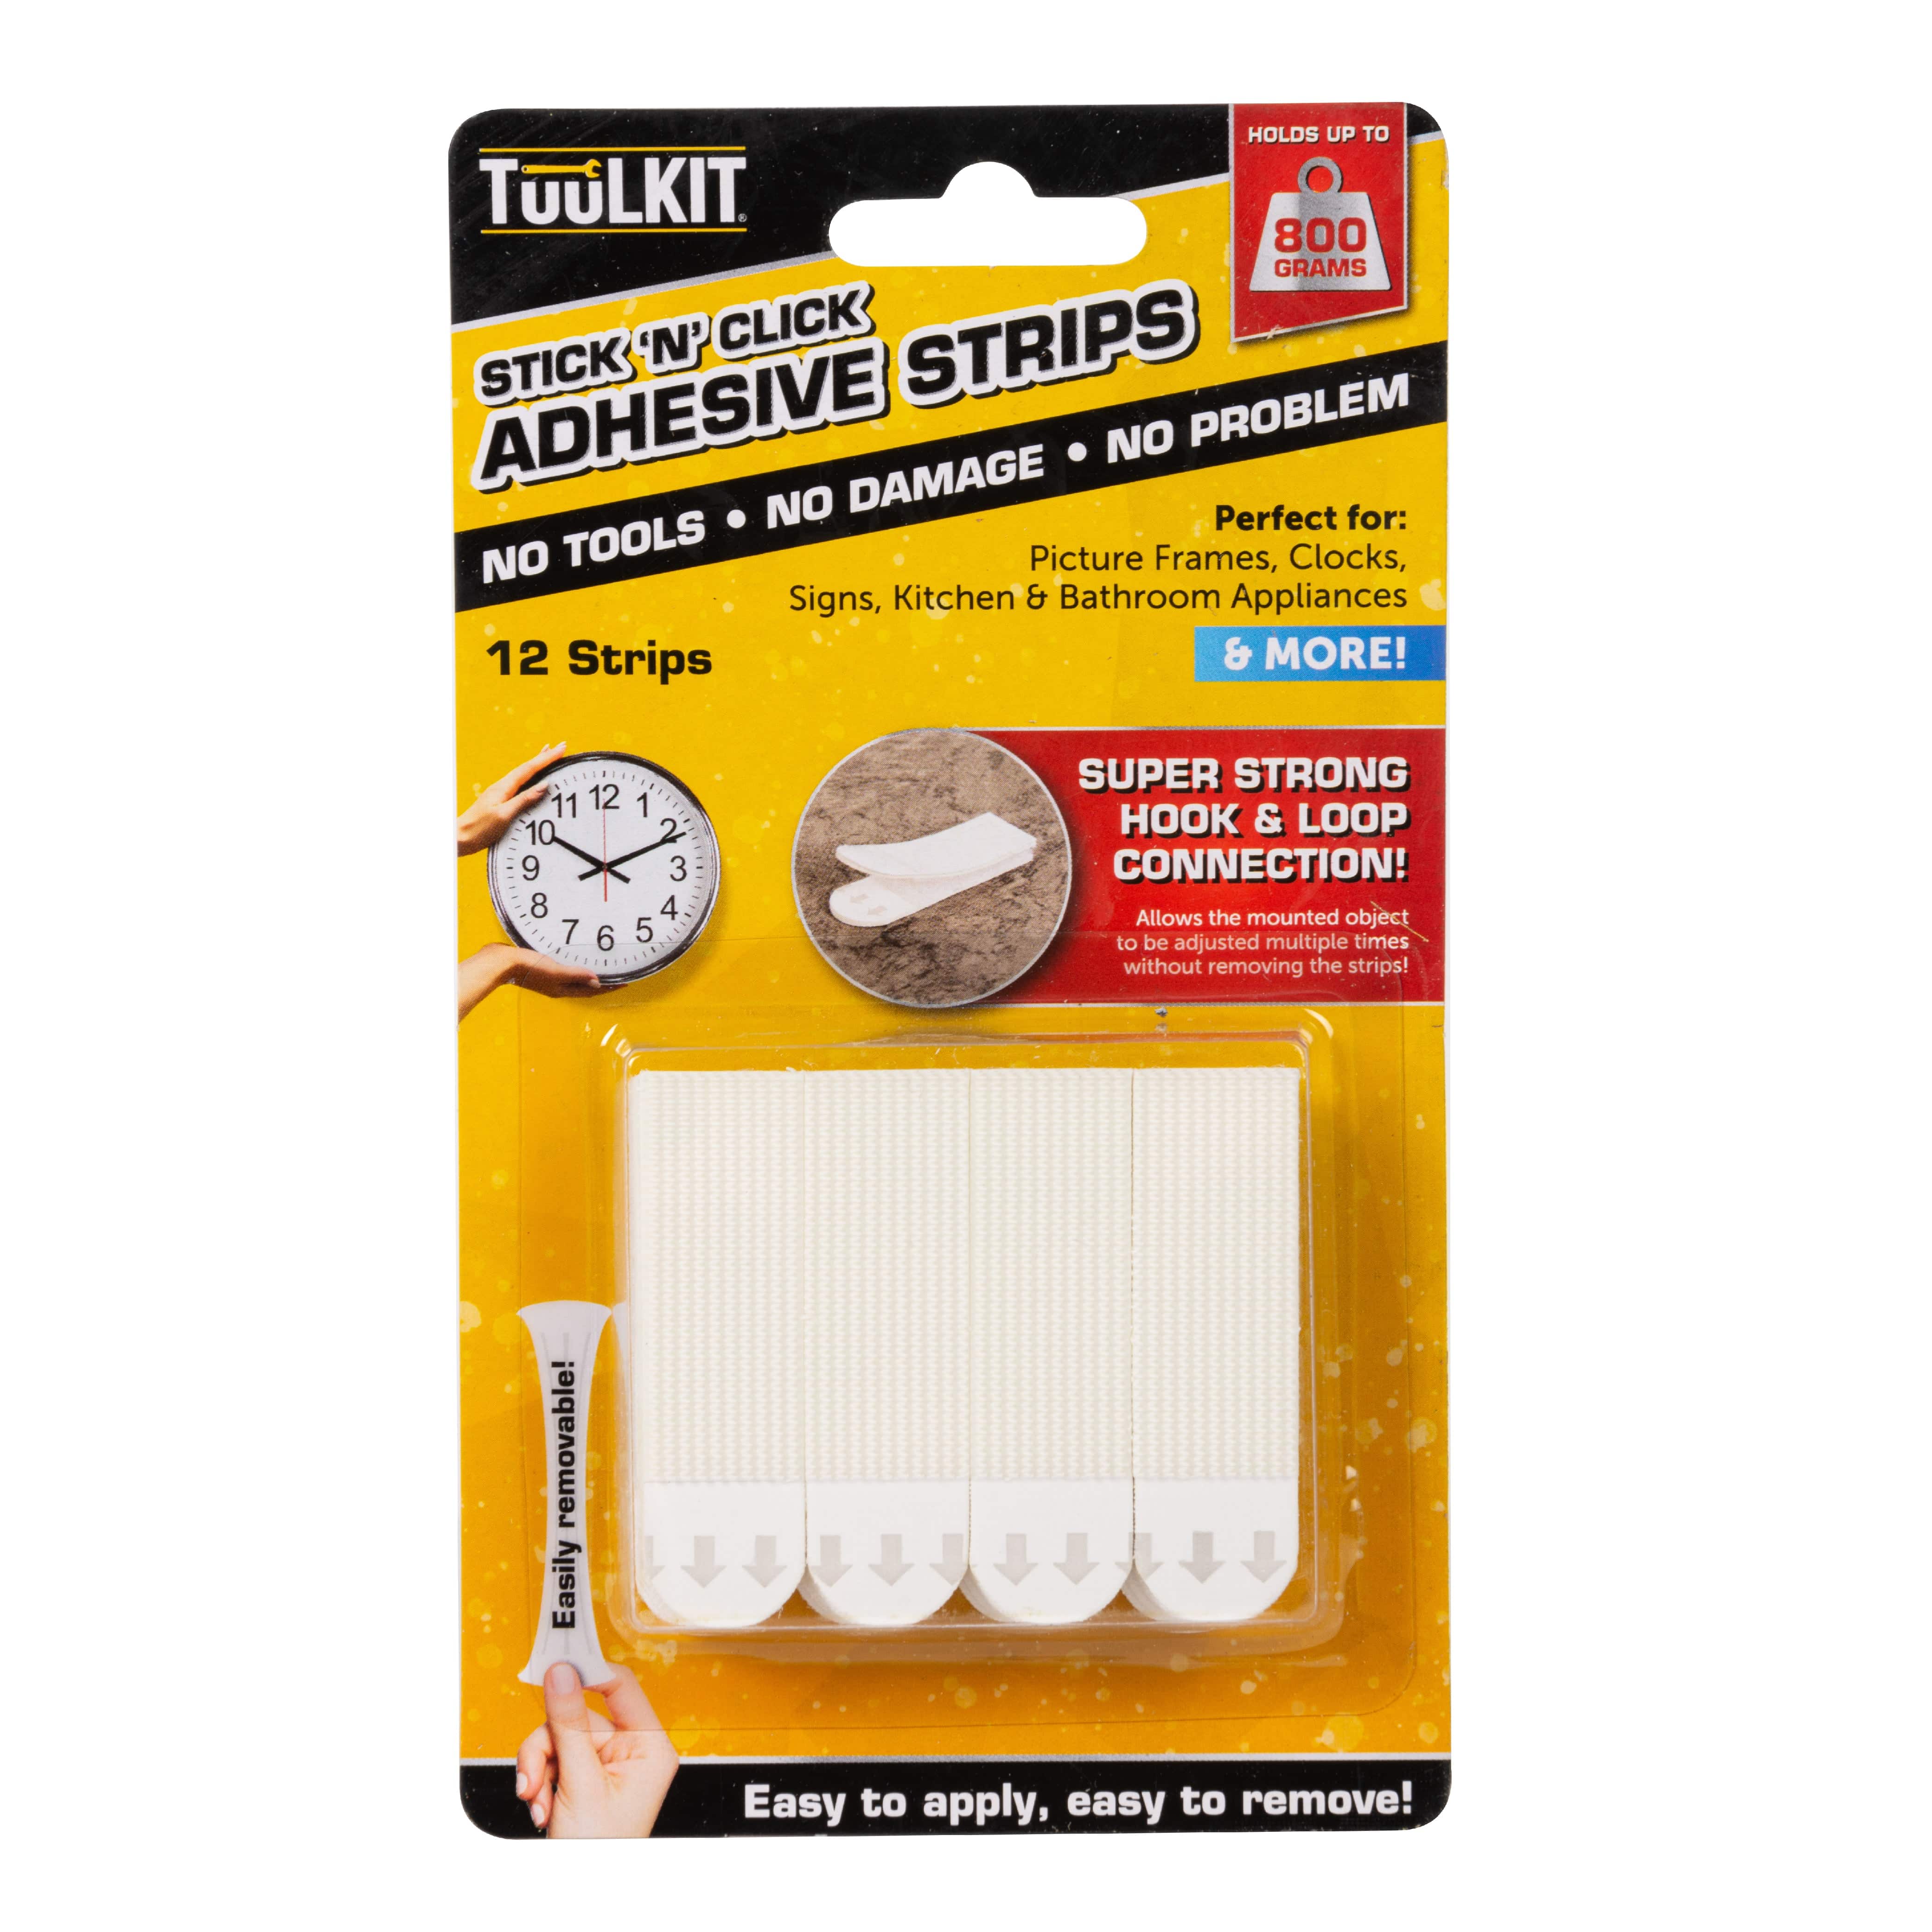 Stick and Click Adhesive Strips - TuulKit - DSL